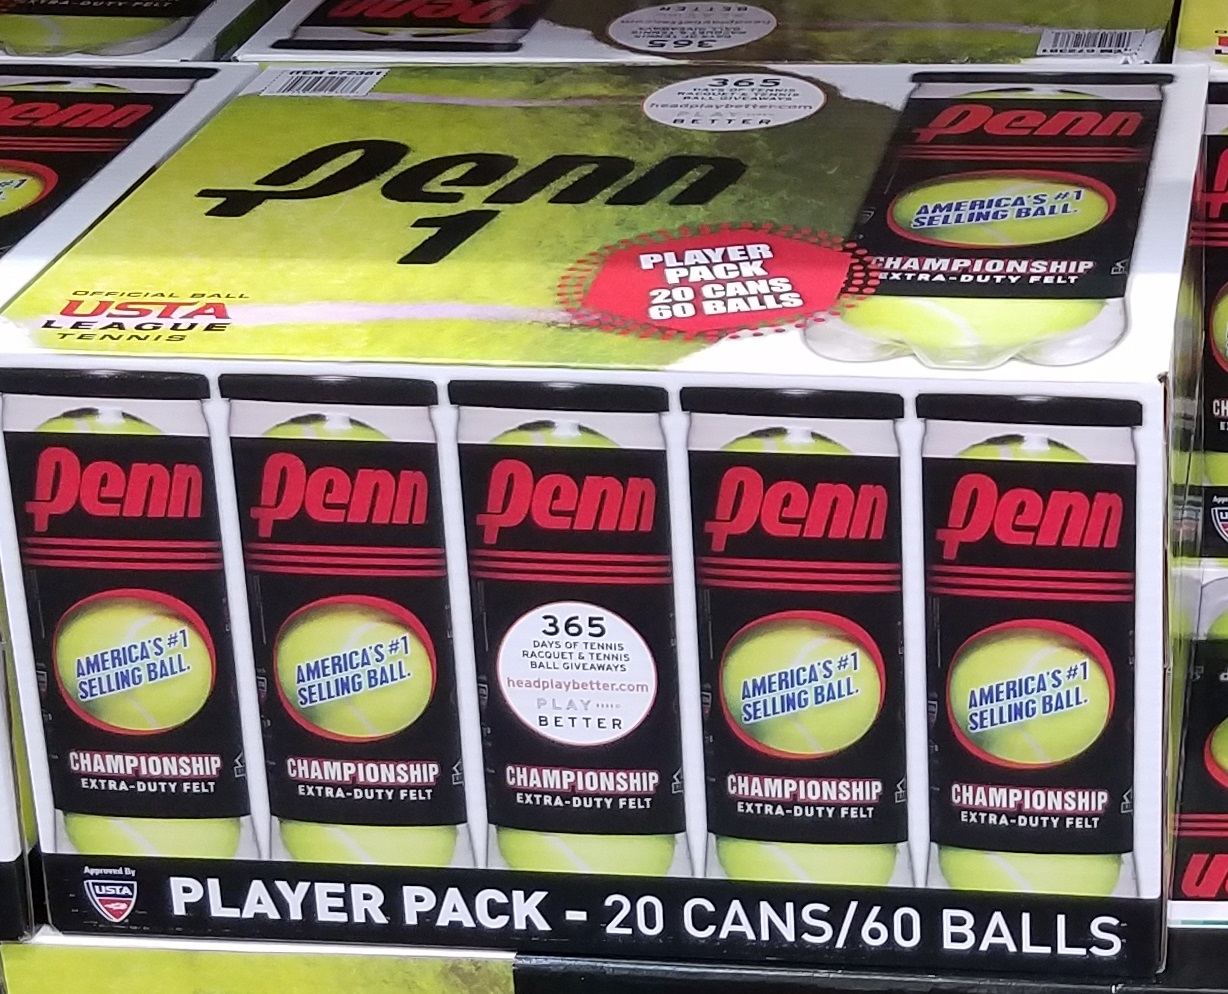 Penn 20pack 3-balls Tennis Balls $29.99 Costco In-store only